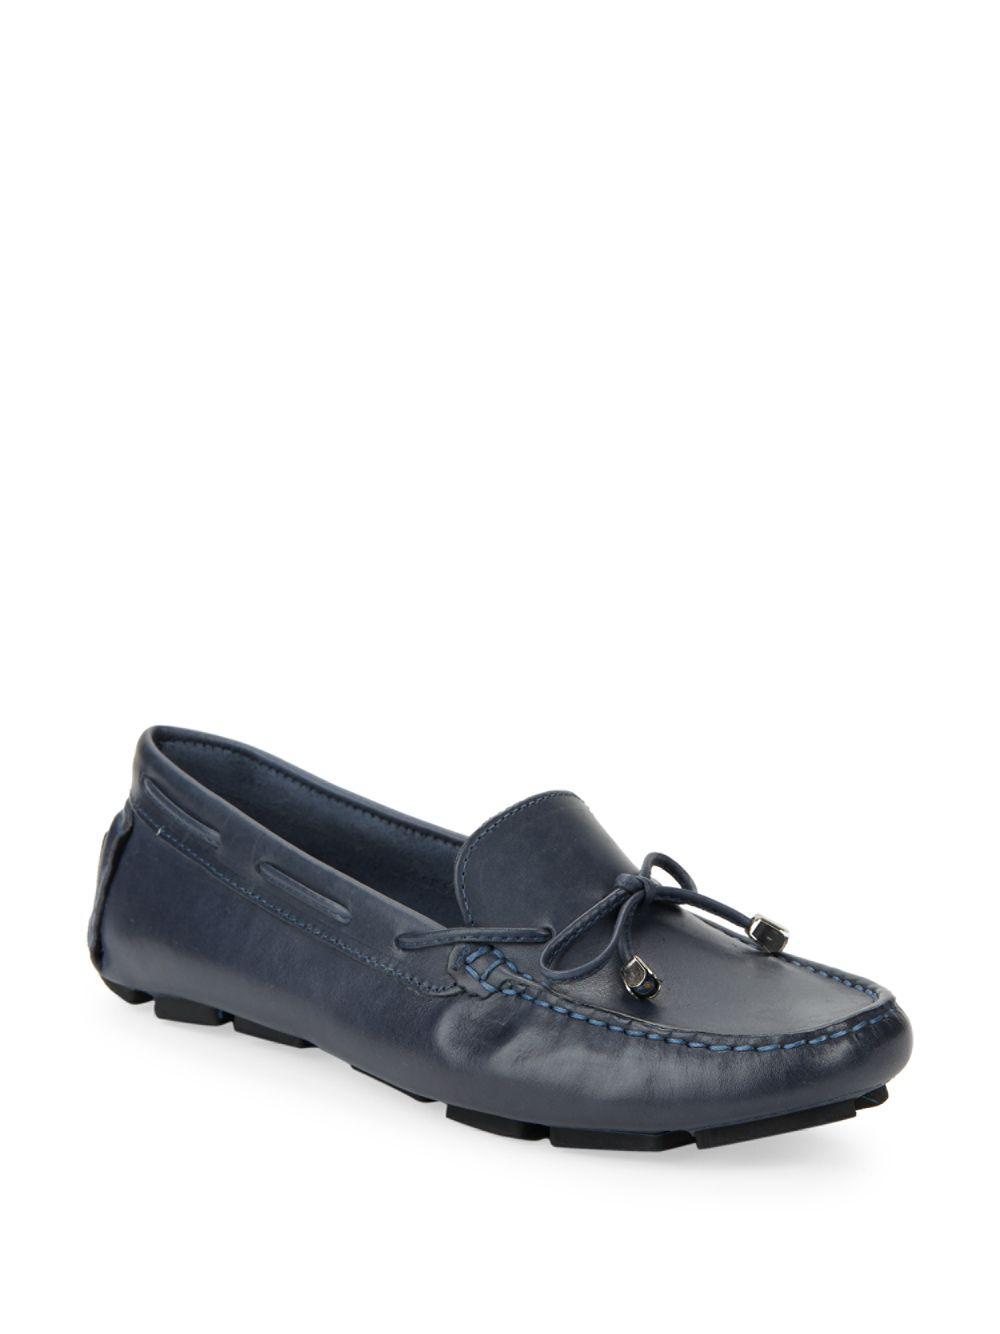 Lyst - Saks Fifth Avenue Lace-up Leather Driver Shoes in Blue